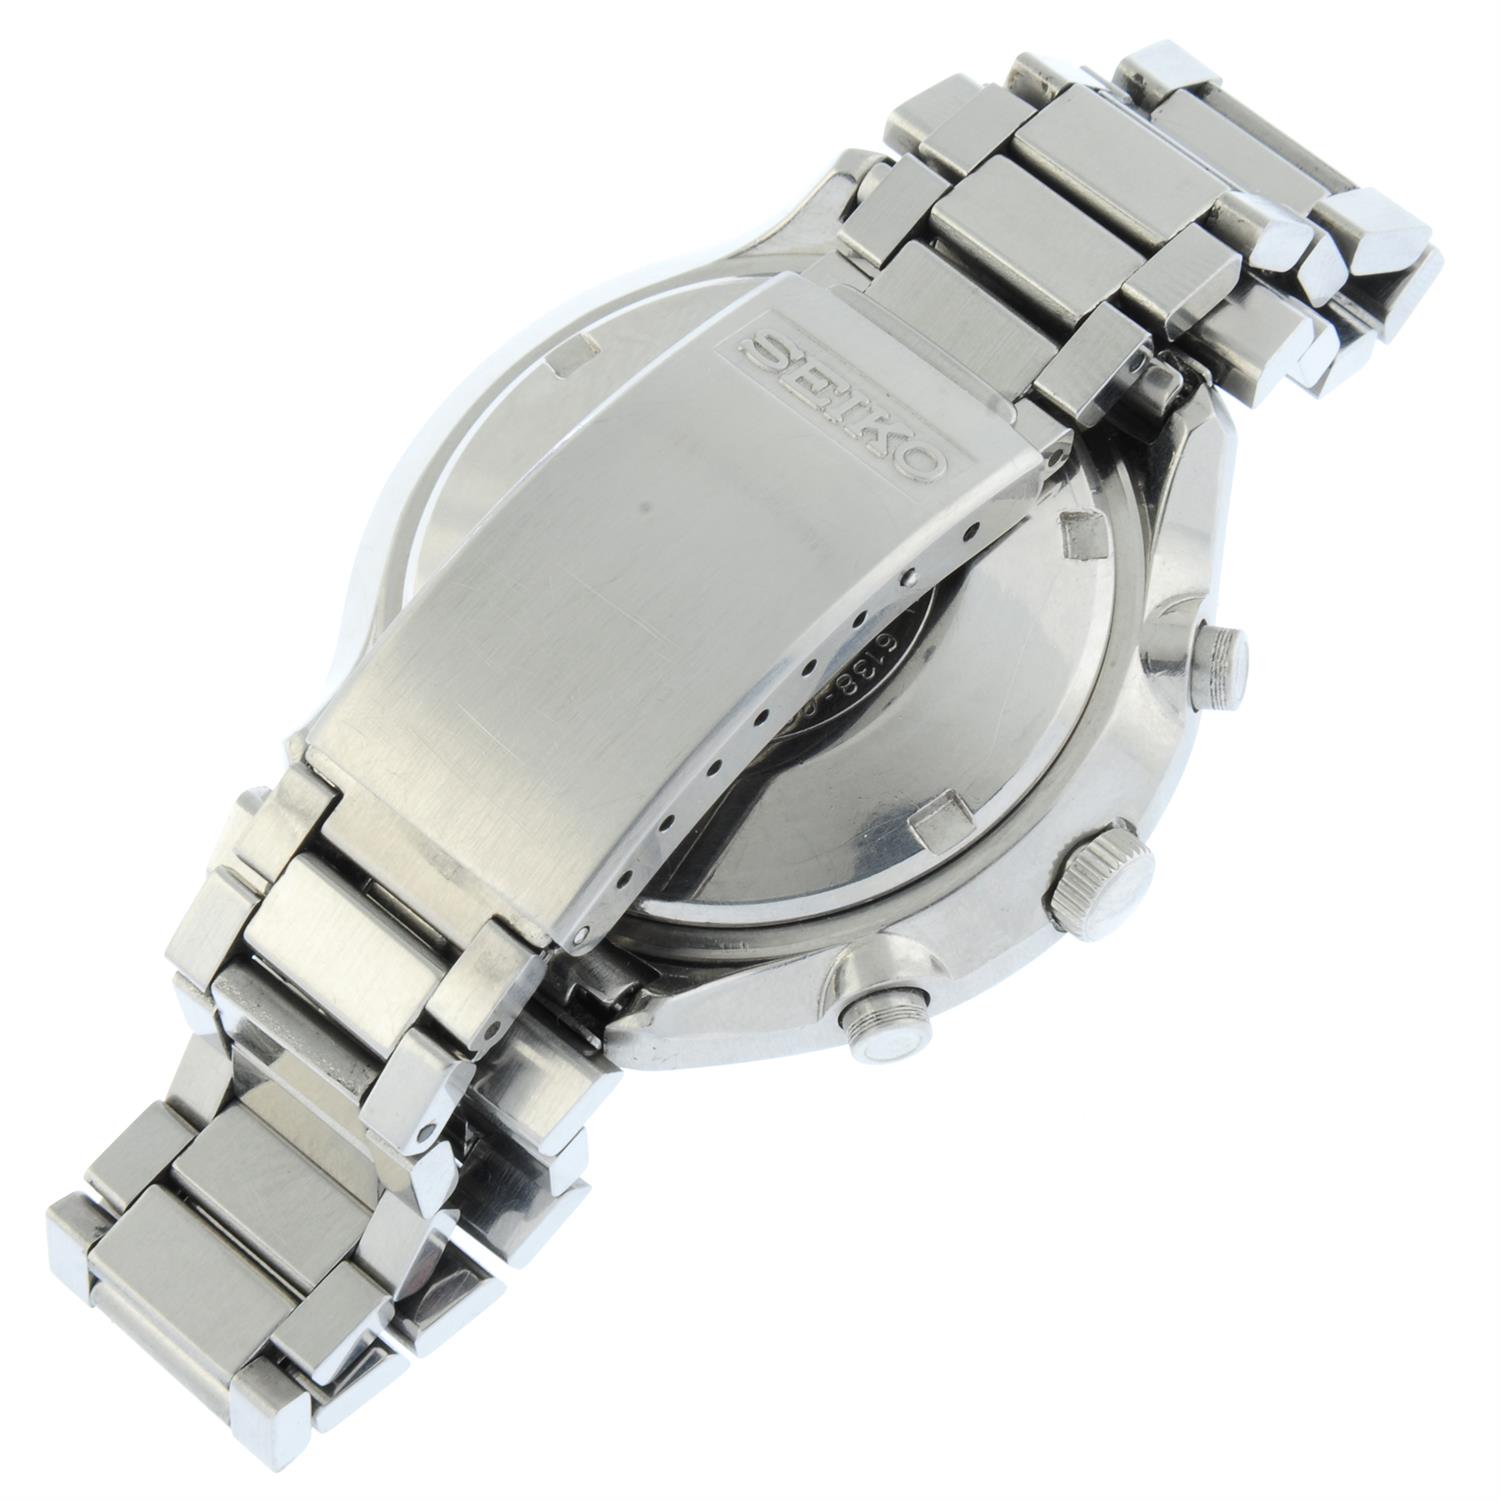 Seiko - a Speed-Timer chronograph watch, 42mm. - Image 2 of 4